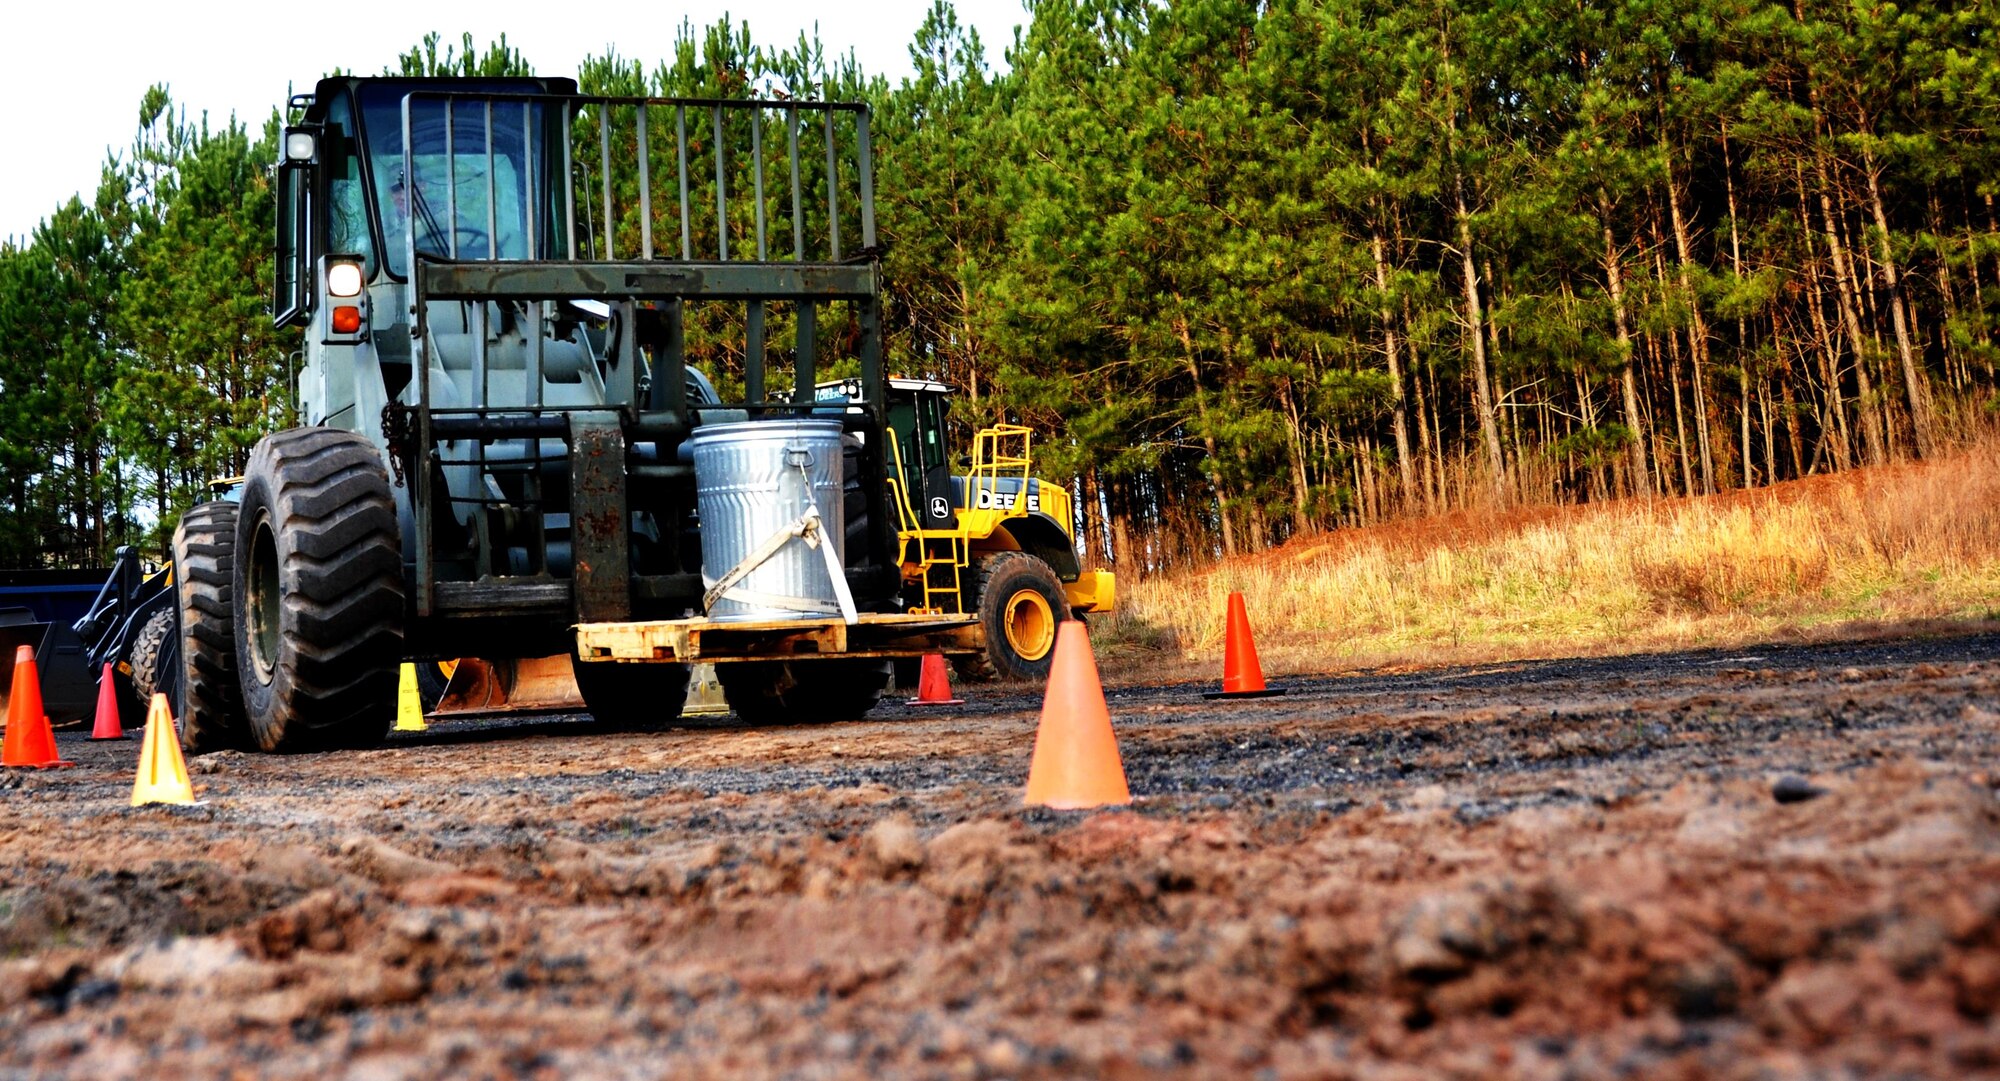 A forklift carrying a trash can full of water attempts to maneuver through the cones without spilling any water during Force Support Silver Flag at Dobbins Air Reserve Base, Georgia, March 11, 2015. About 70 Airmen on teams from Peterson Air Force Base, Colorado; the 445th FSS from Wright-Patterson Air Force Base, Ohio; the 908th FSS from Maxwell AFB, Alabama; the 910th FSS from Youngstown ARB, Ohio; the 911th FSS from Pittsburgh, Pennsylvania; and the 934th FSS from Minneapolis – St. Paul, Minnesota competed in FS Silver Flag. (U.S. Air Force photo/Senior Airman Daniel Phelps)